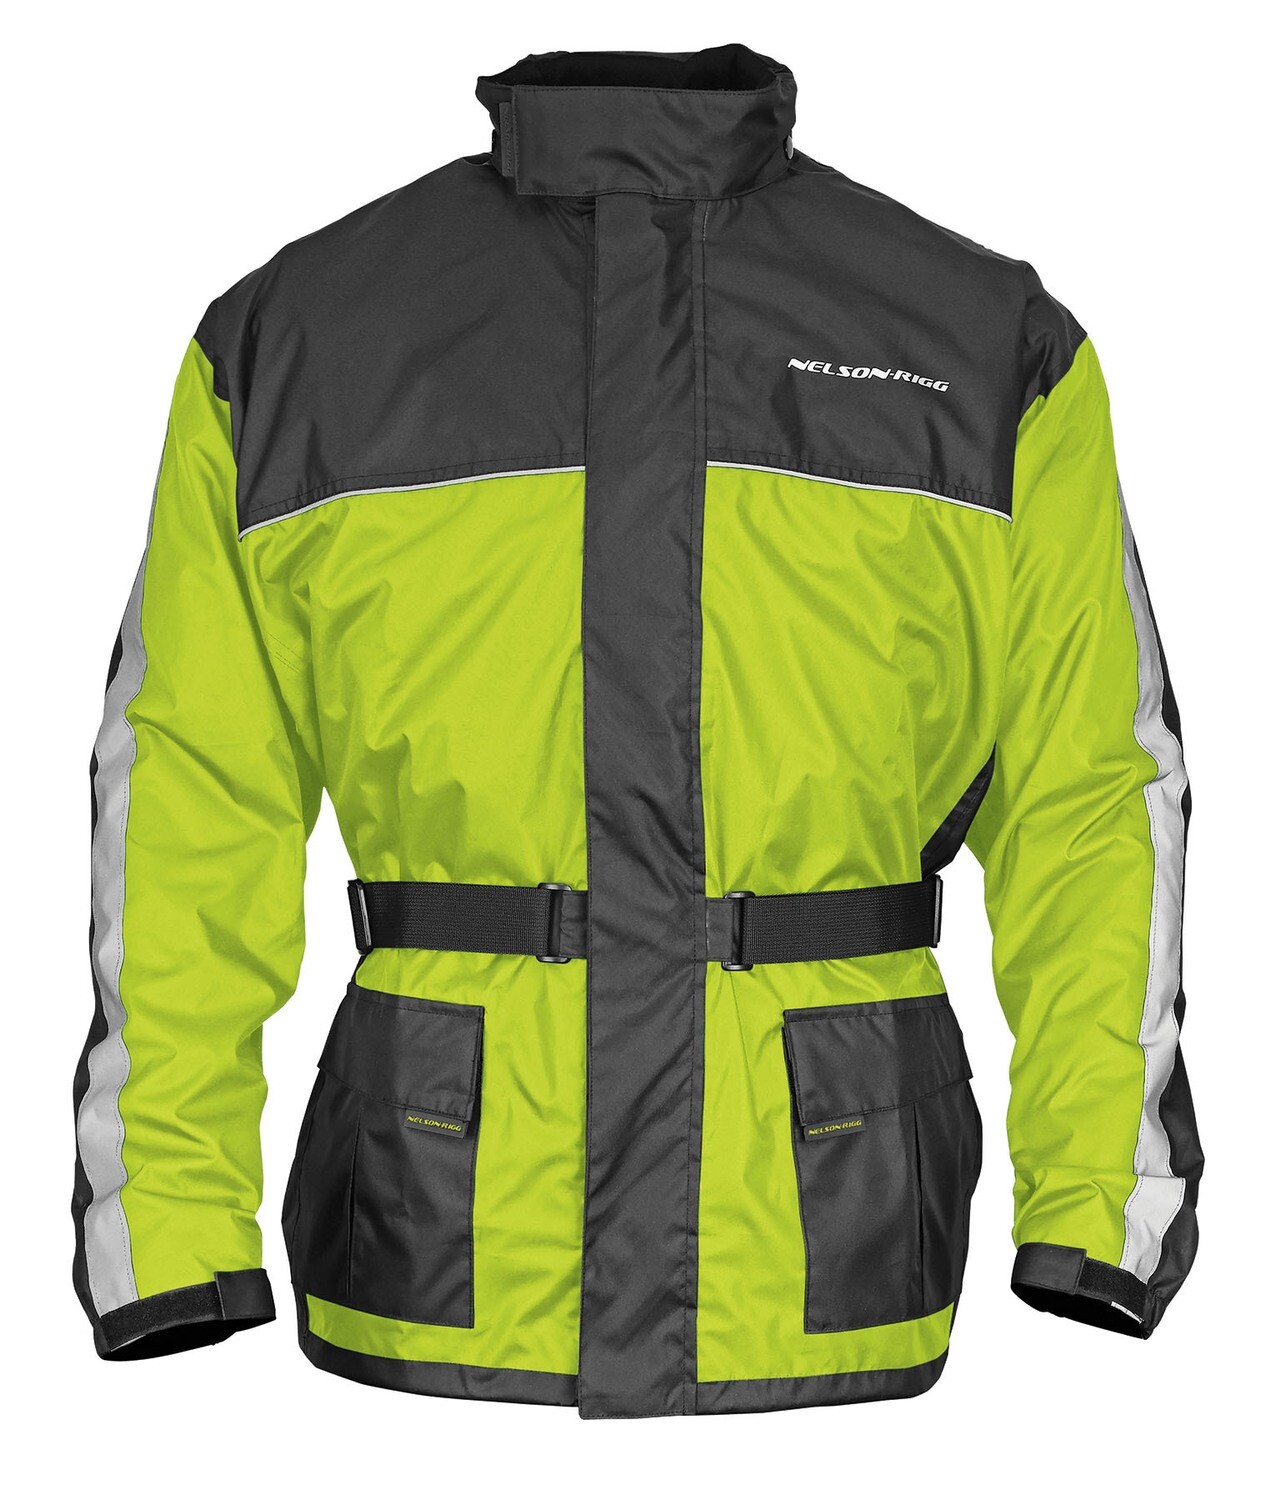 CHUMPA IMPERMEABLE SOLO STORM YLW